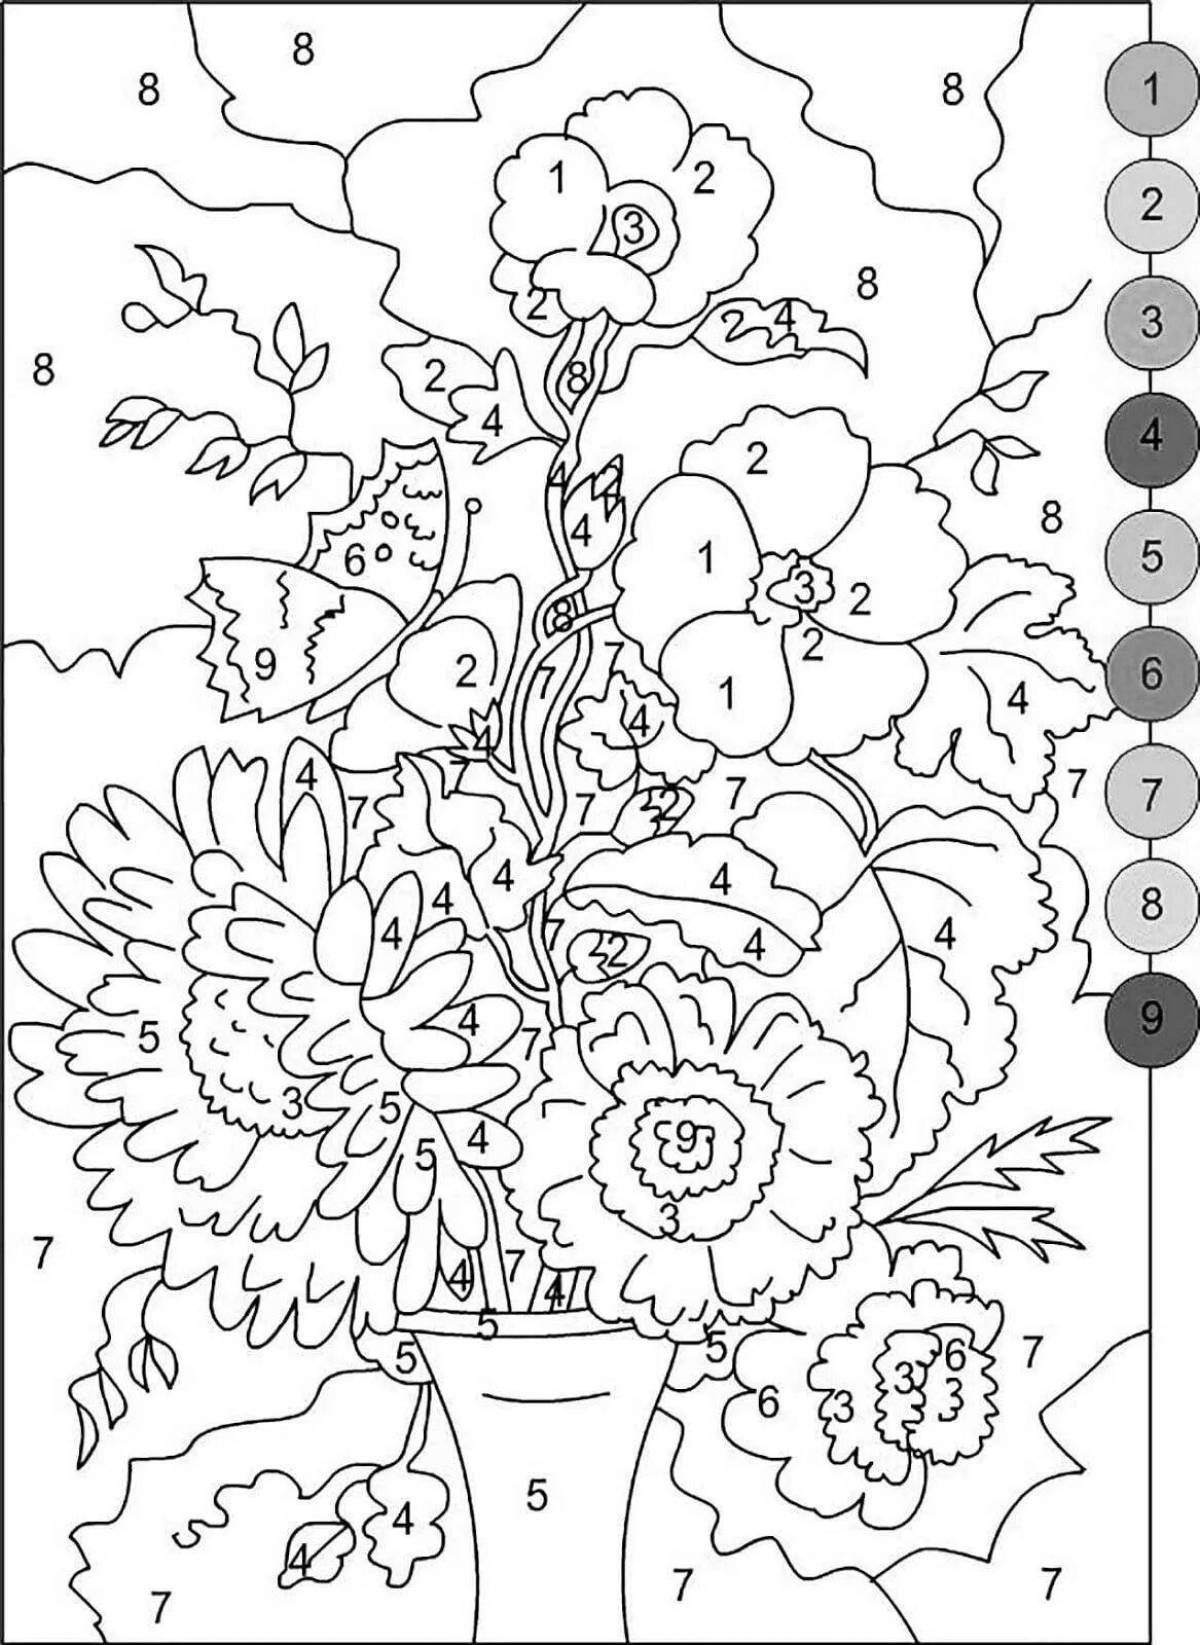 License plate coloring page